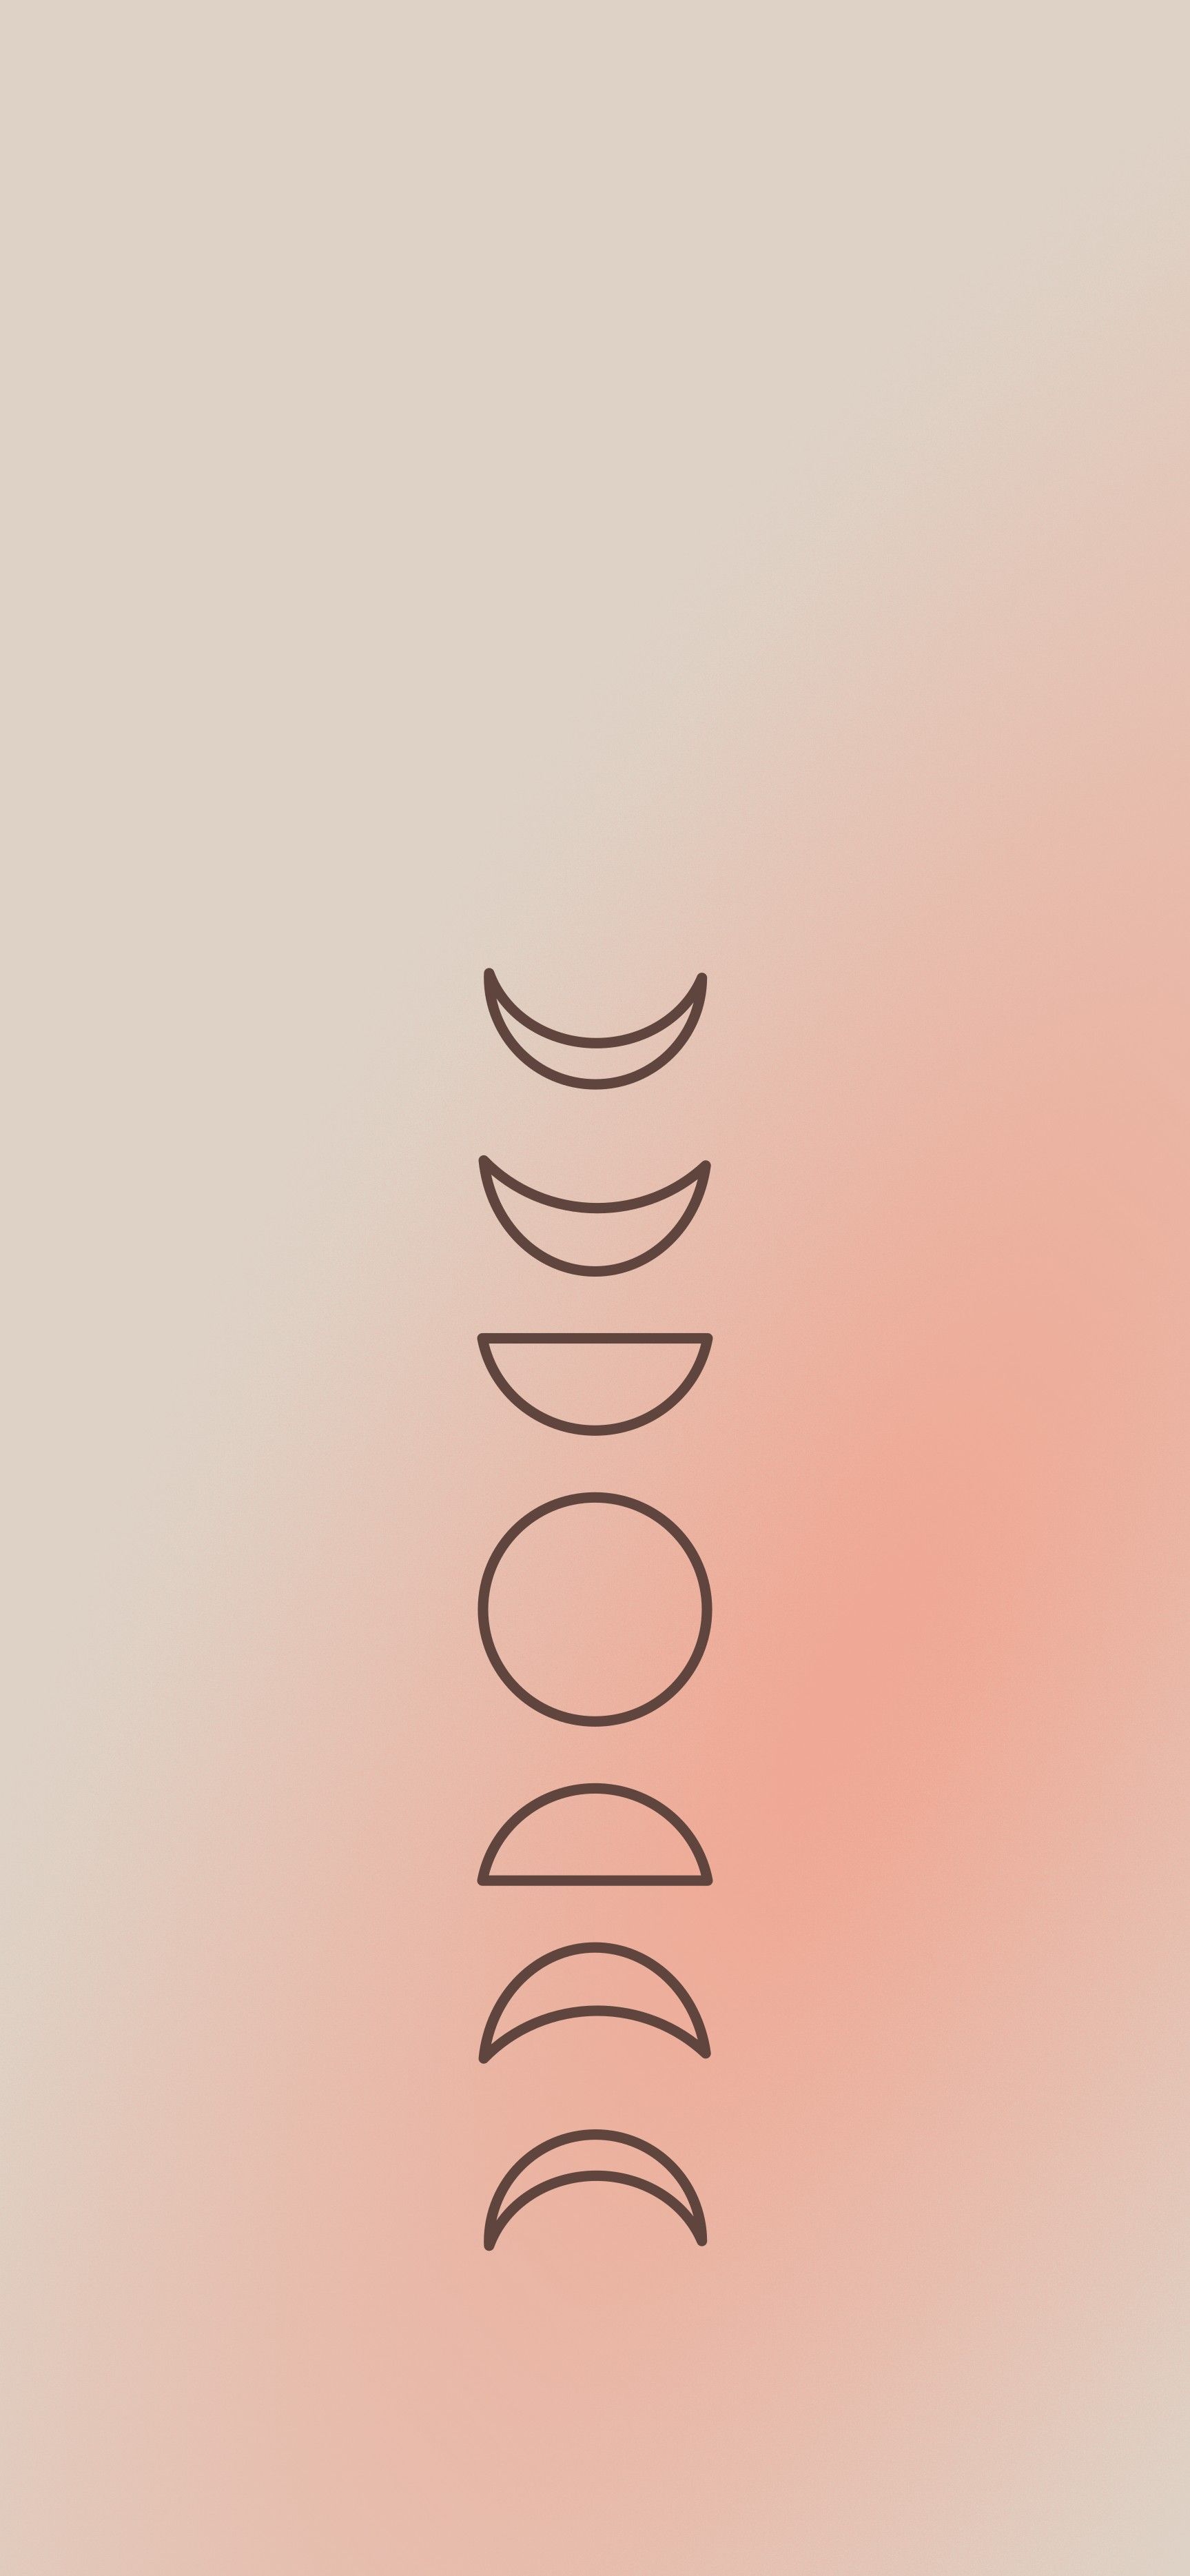 A graphic of the phases of the moon on a pink and orange gradient background - Moon phases, light pink